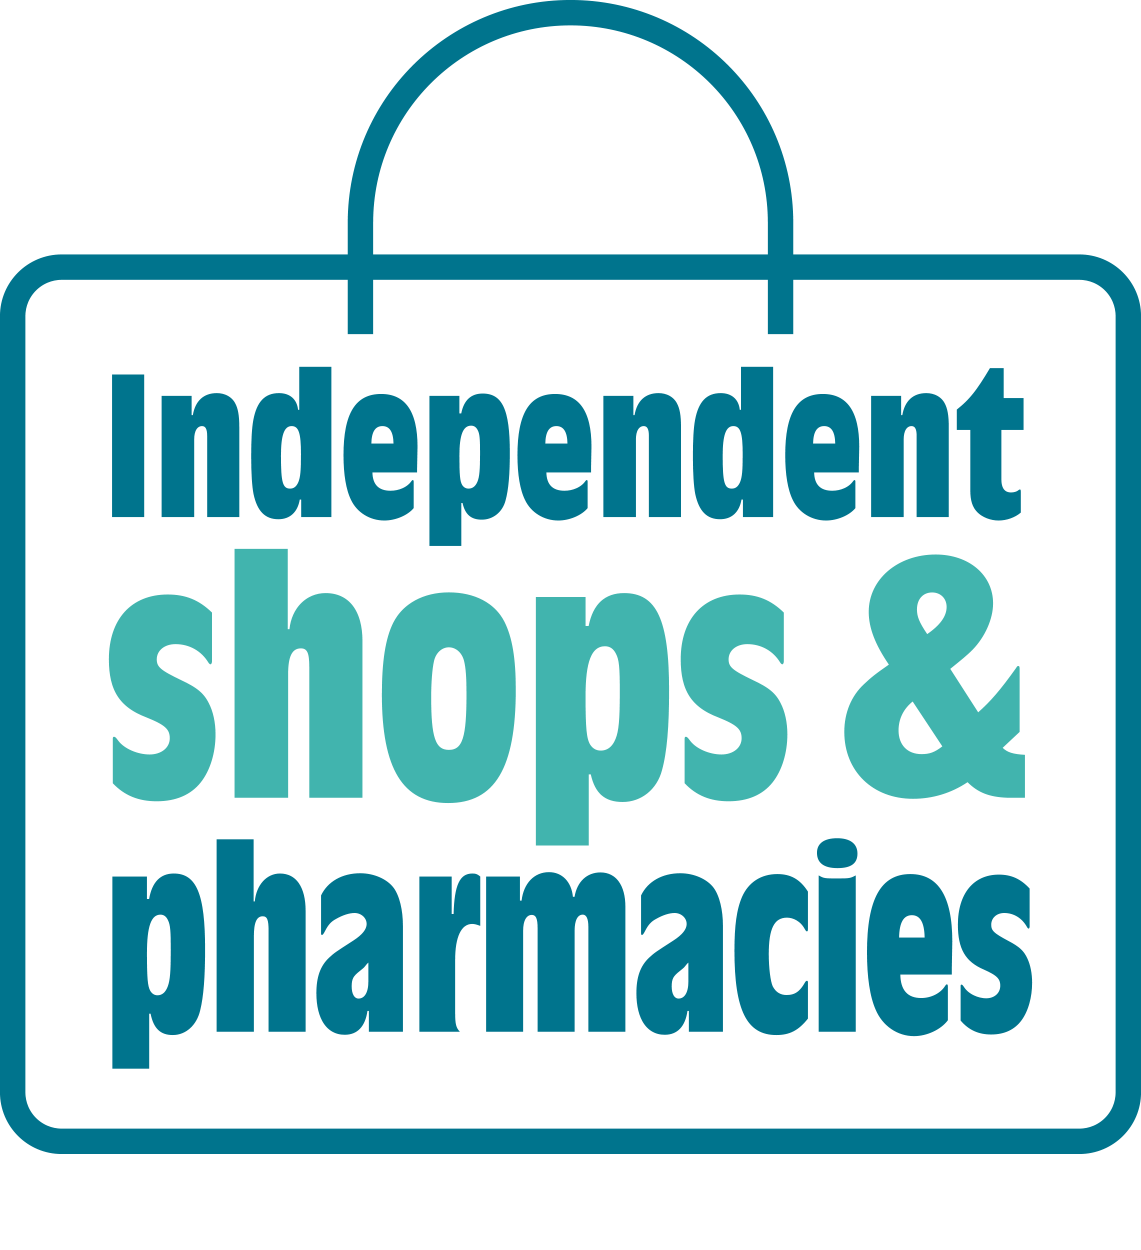 Image of shopping bag with 'independent shops & pharmacies' written inside